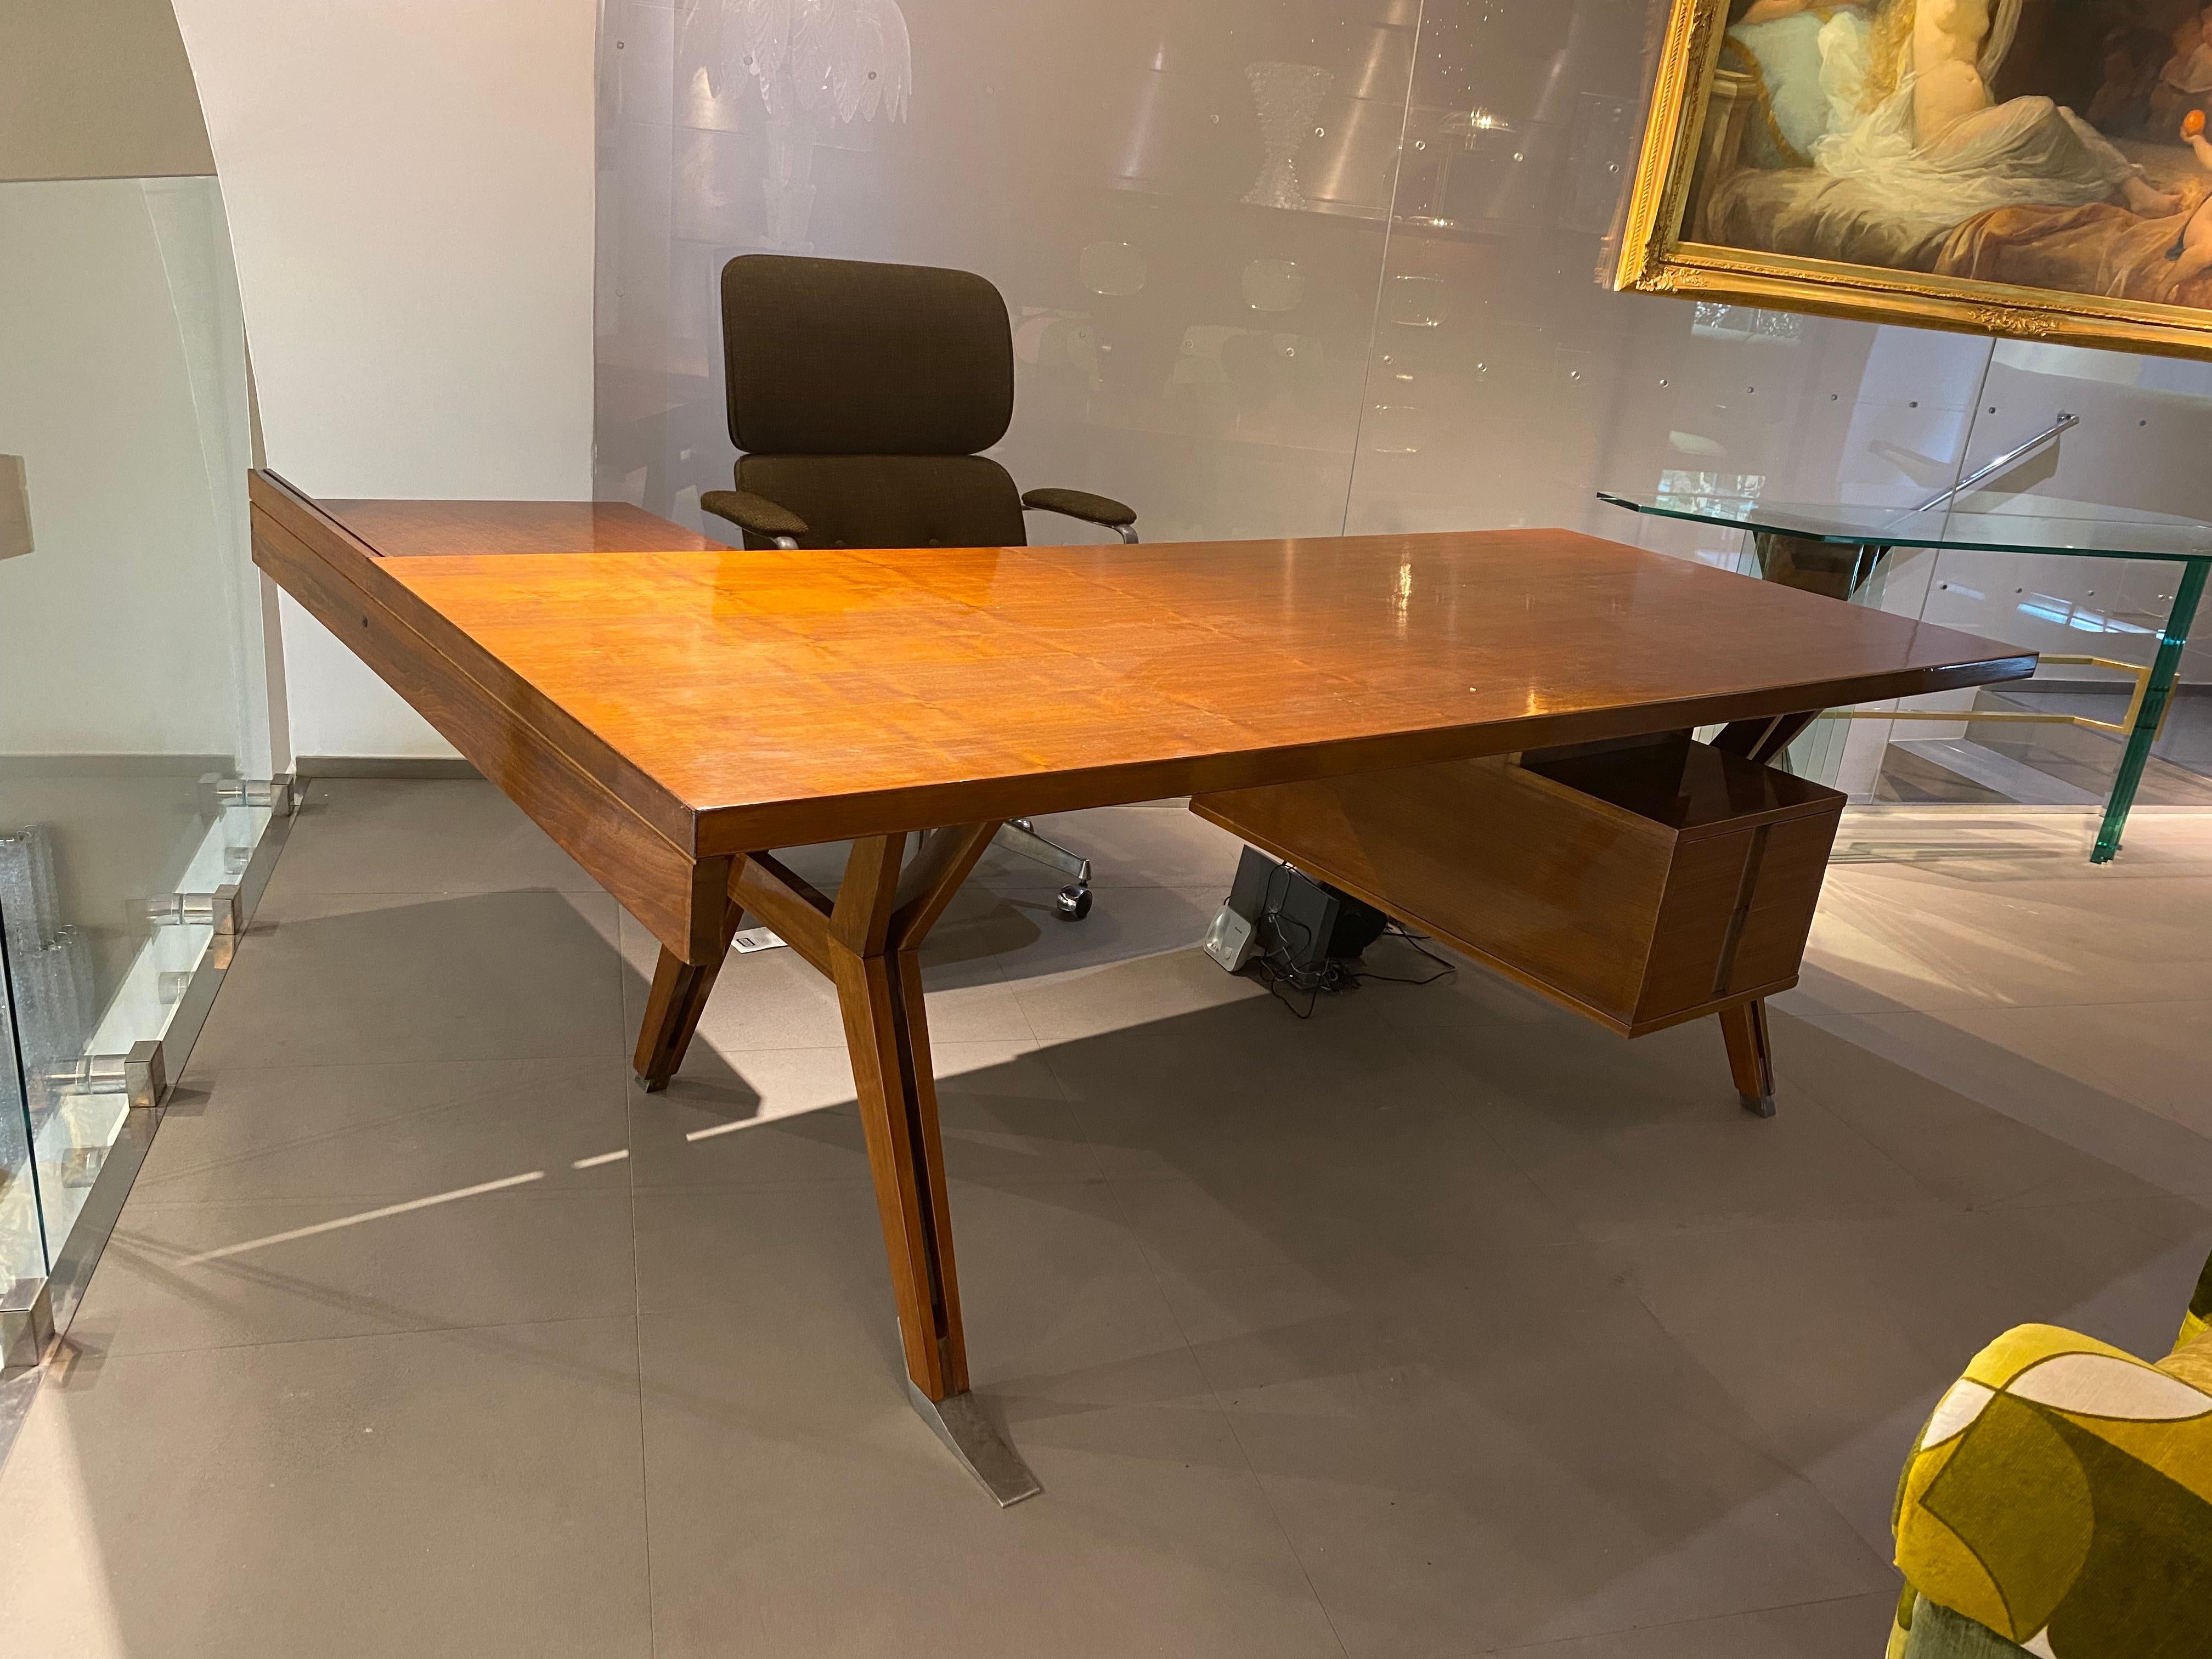 Italian Important Mid Century Executive Desk by Ico Parisi for MIM 1958 For Sale